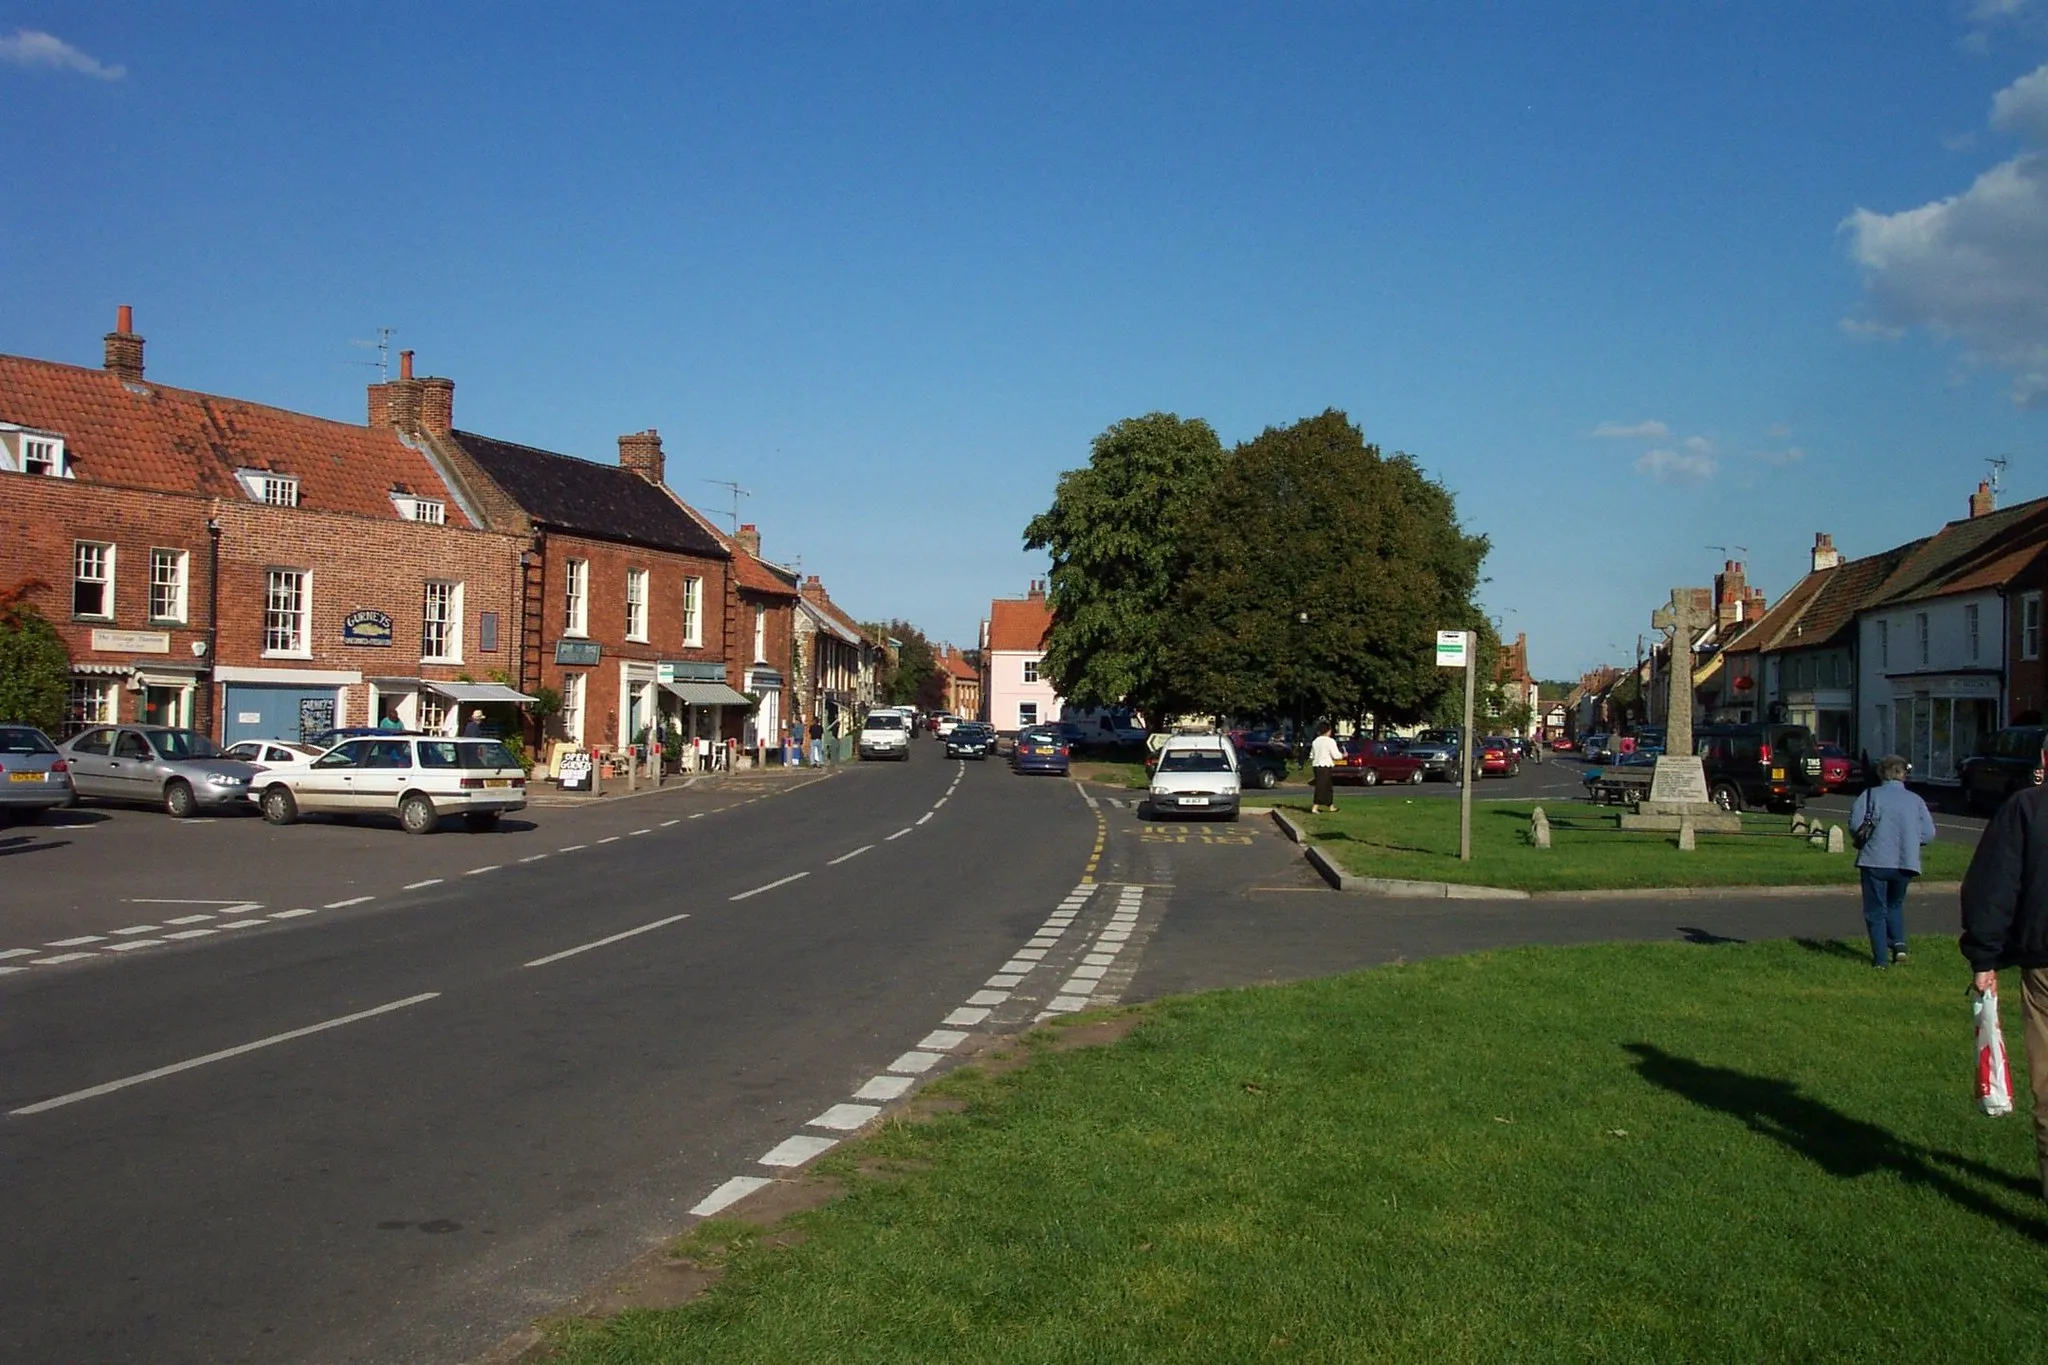 Photo showing: The village green in Burnham Market. For more information see the Wikipedia article Burnham Market.